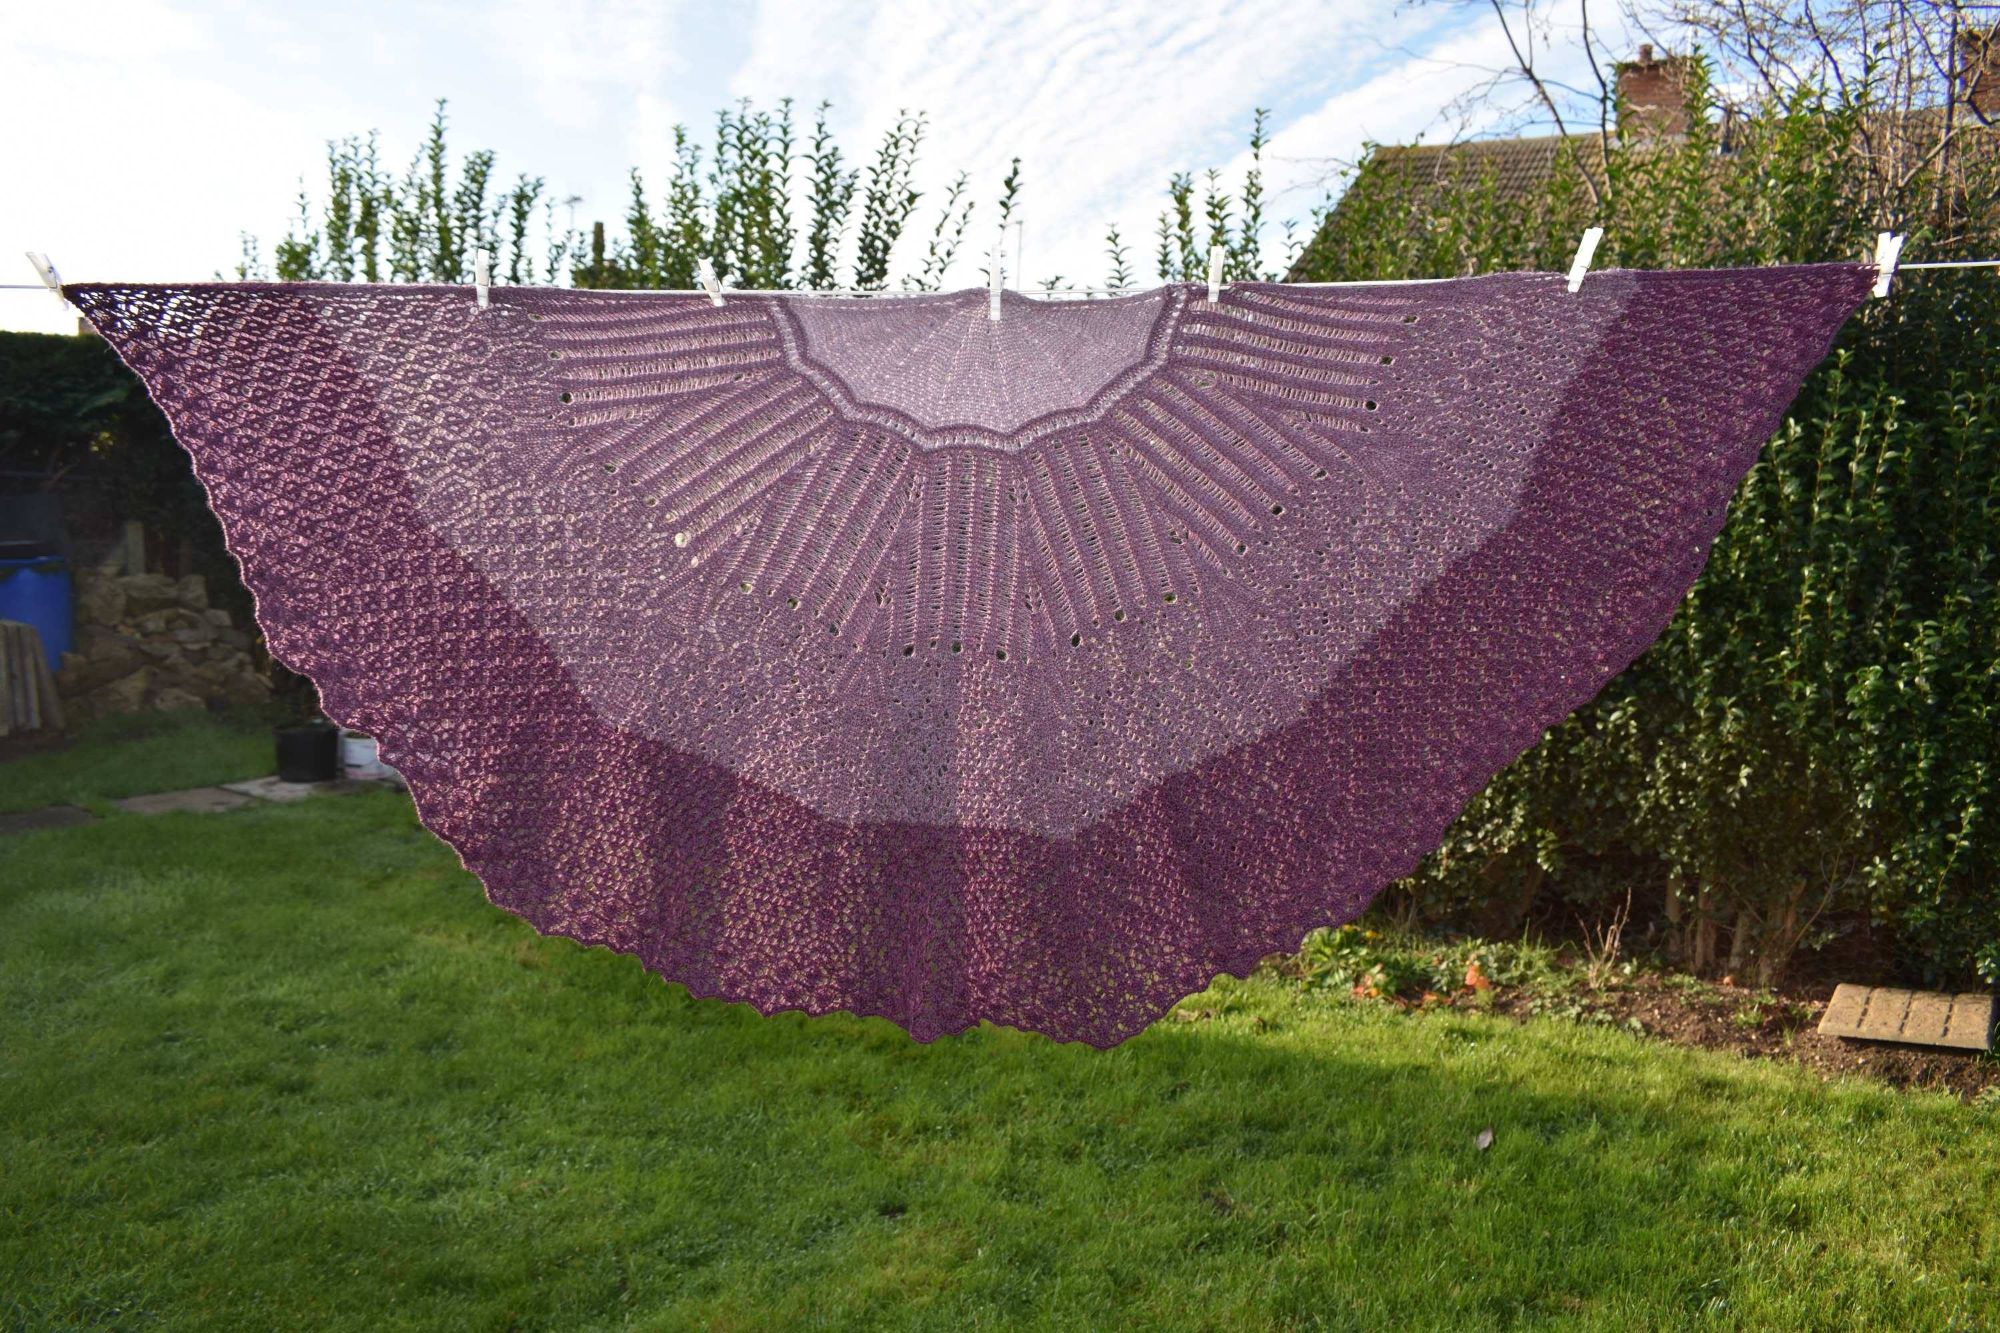 Age of Wonder shawl, hanging on a washing line, spread out, knit in different shades of purple